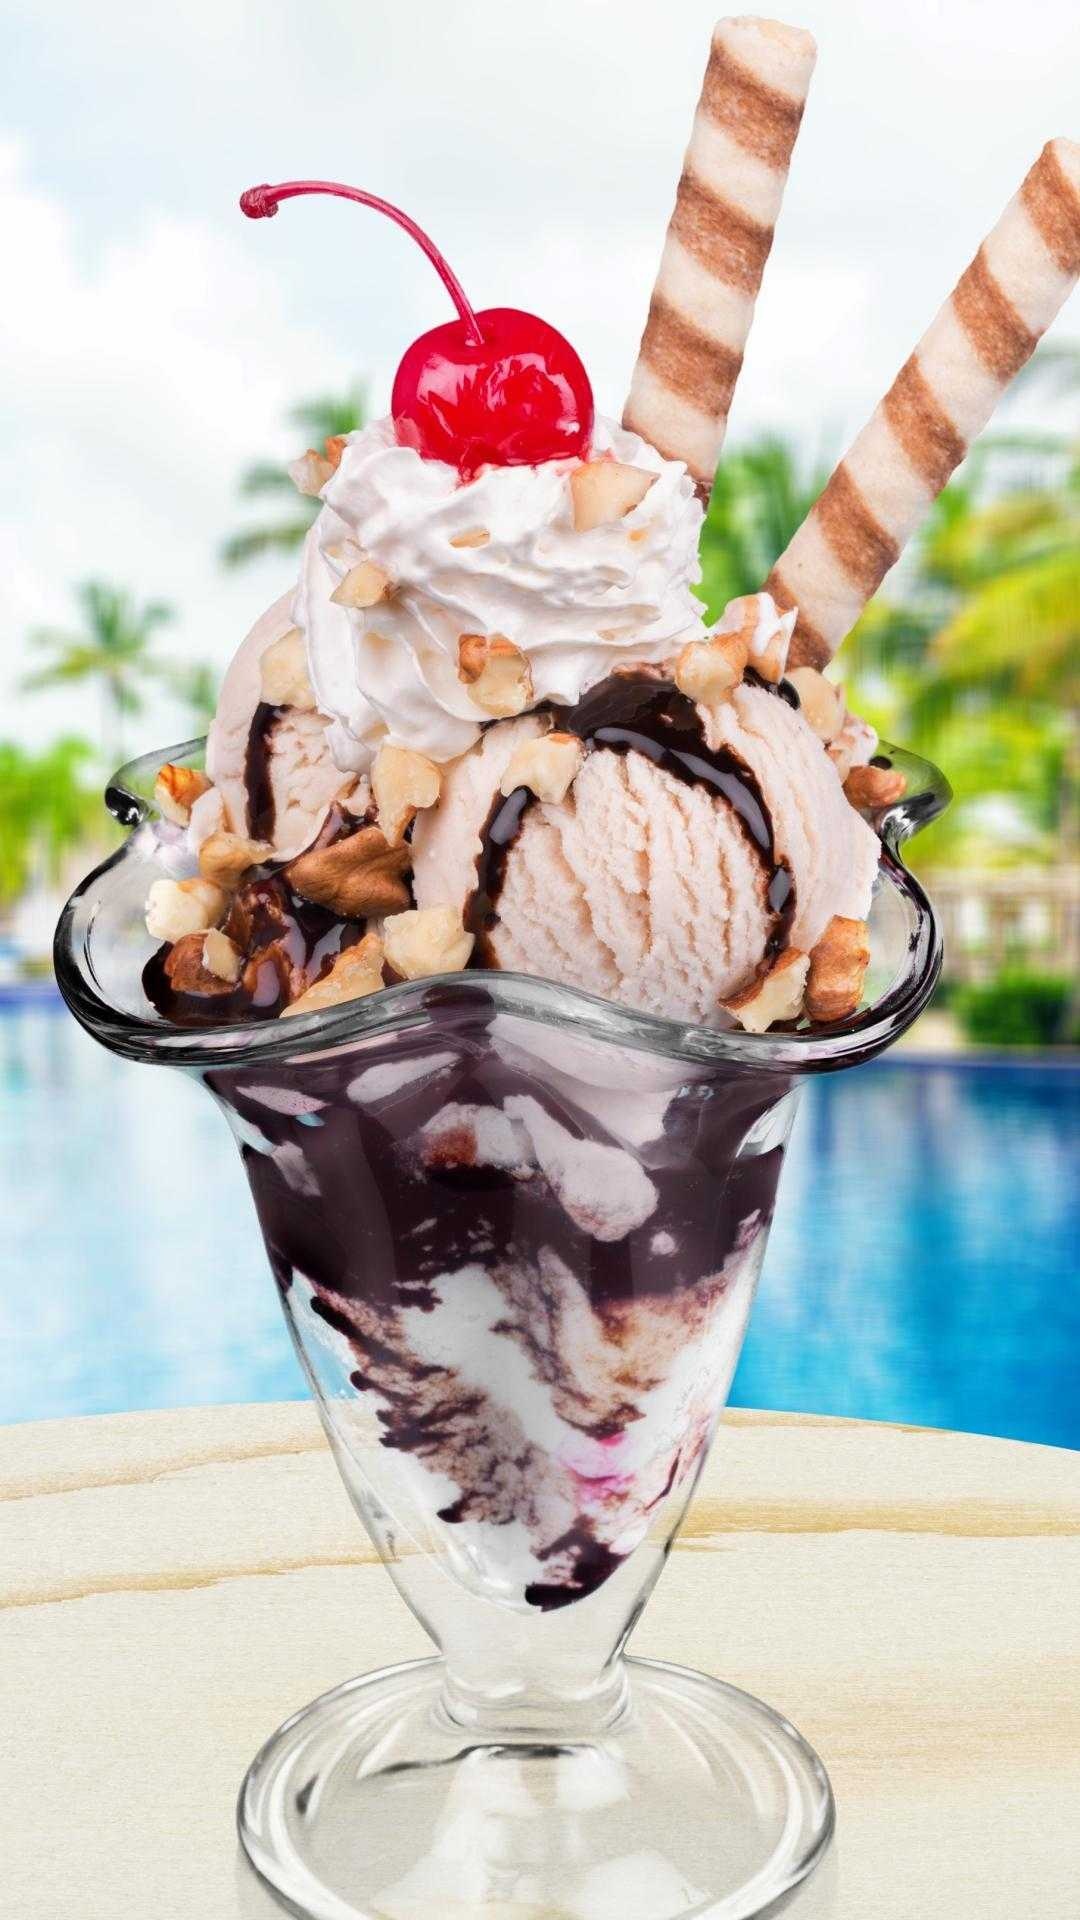 Gelato: Made from a mixture of milk, cream, sugar, fresh fruit, and nuts. 1080x1920 Full HD Background.